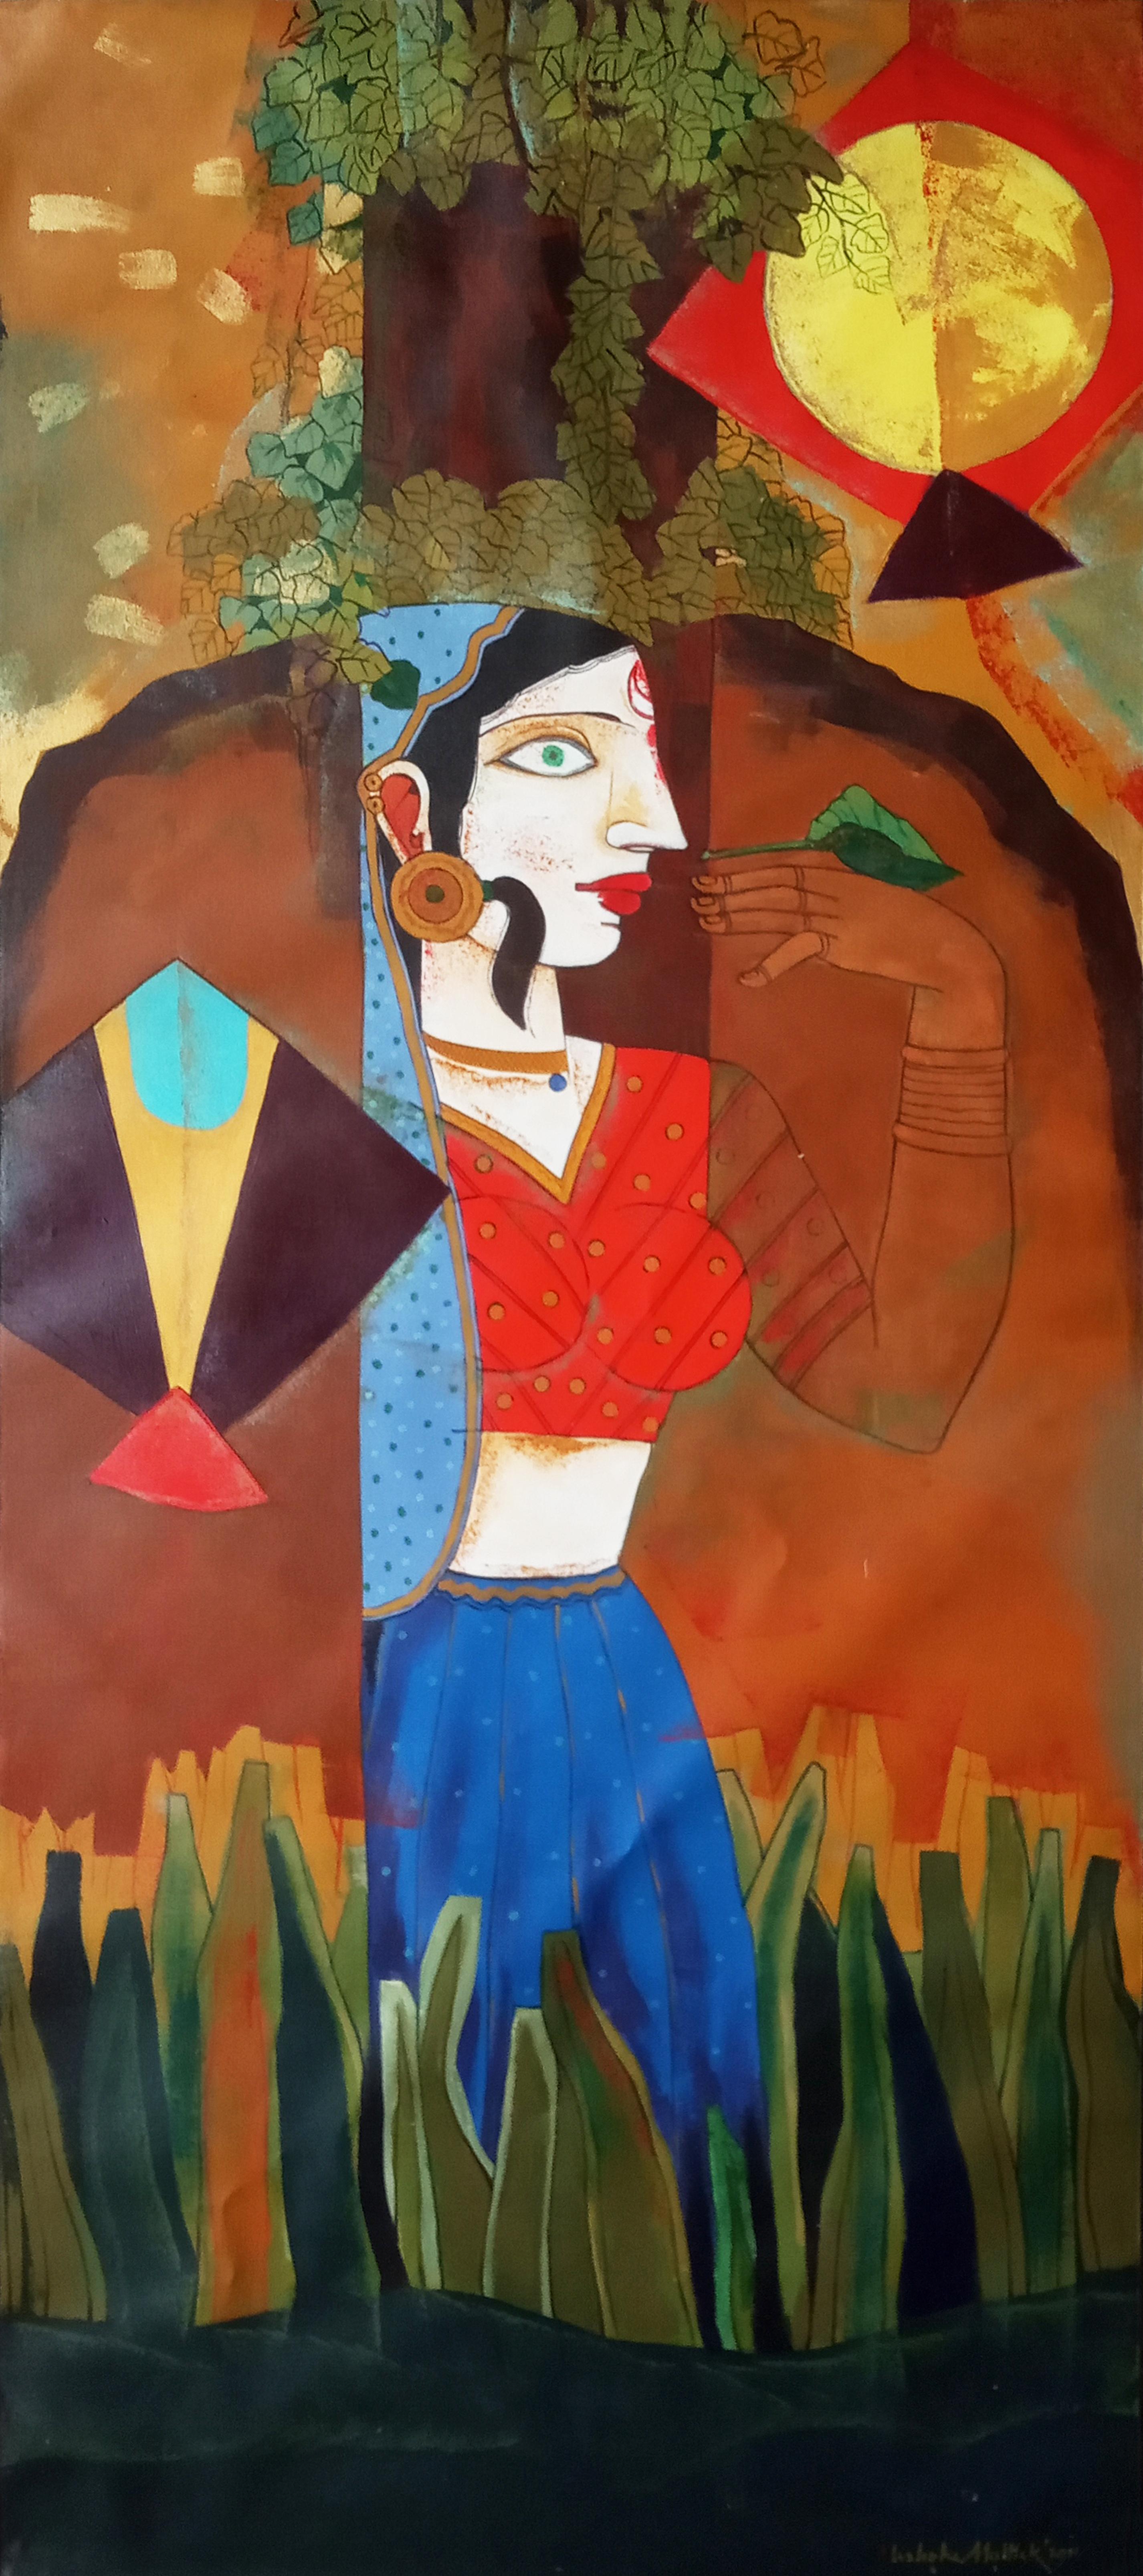 Ashoke Mullick Portrait Painting - Woman flying Kites, Acrylic on Canvas, Red, Blue, Green, Brown "In Stock"